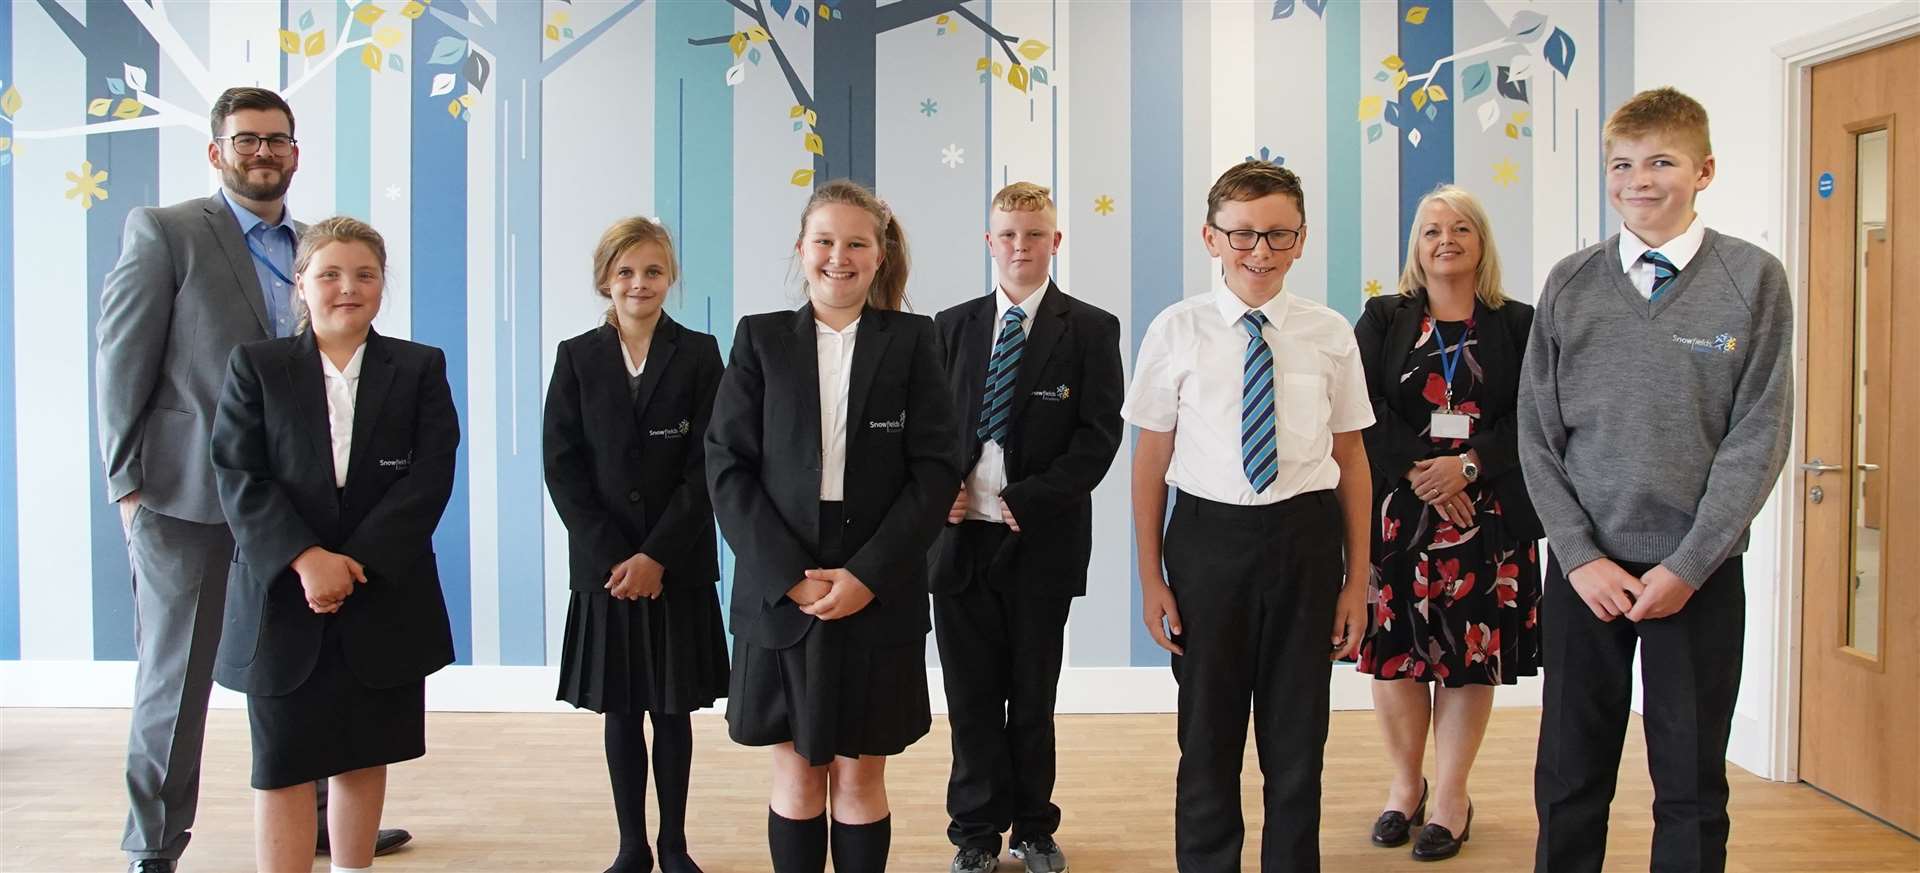 Snowfields Academy's opening day. Lottie, Molly, Neve, Harley, Jude and Joshua with James Doddington, Assistant Principal and Dee Pickerill, Principal.